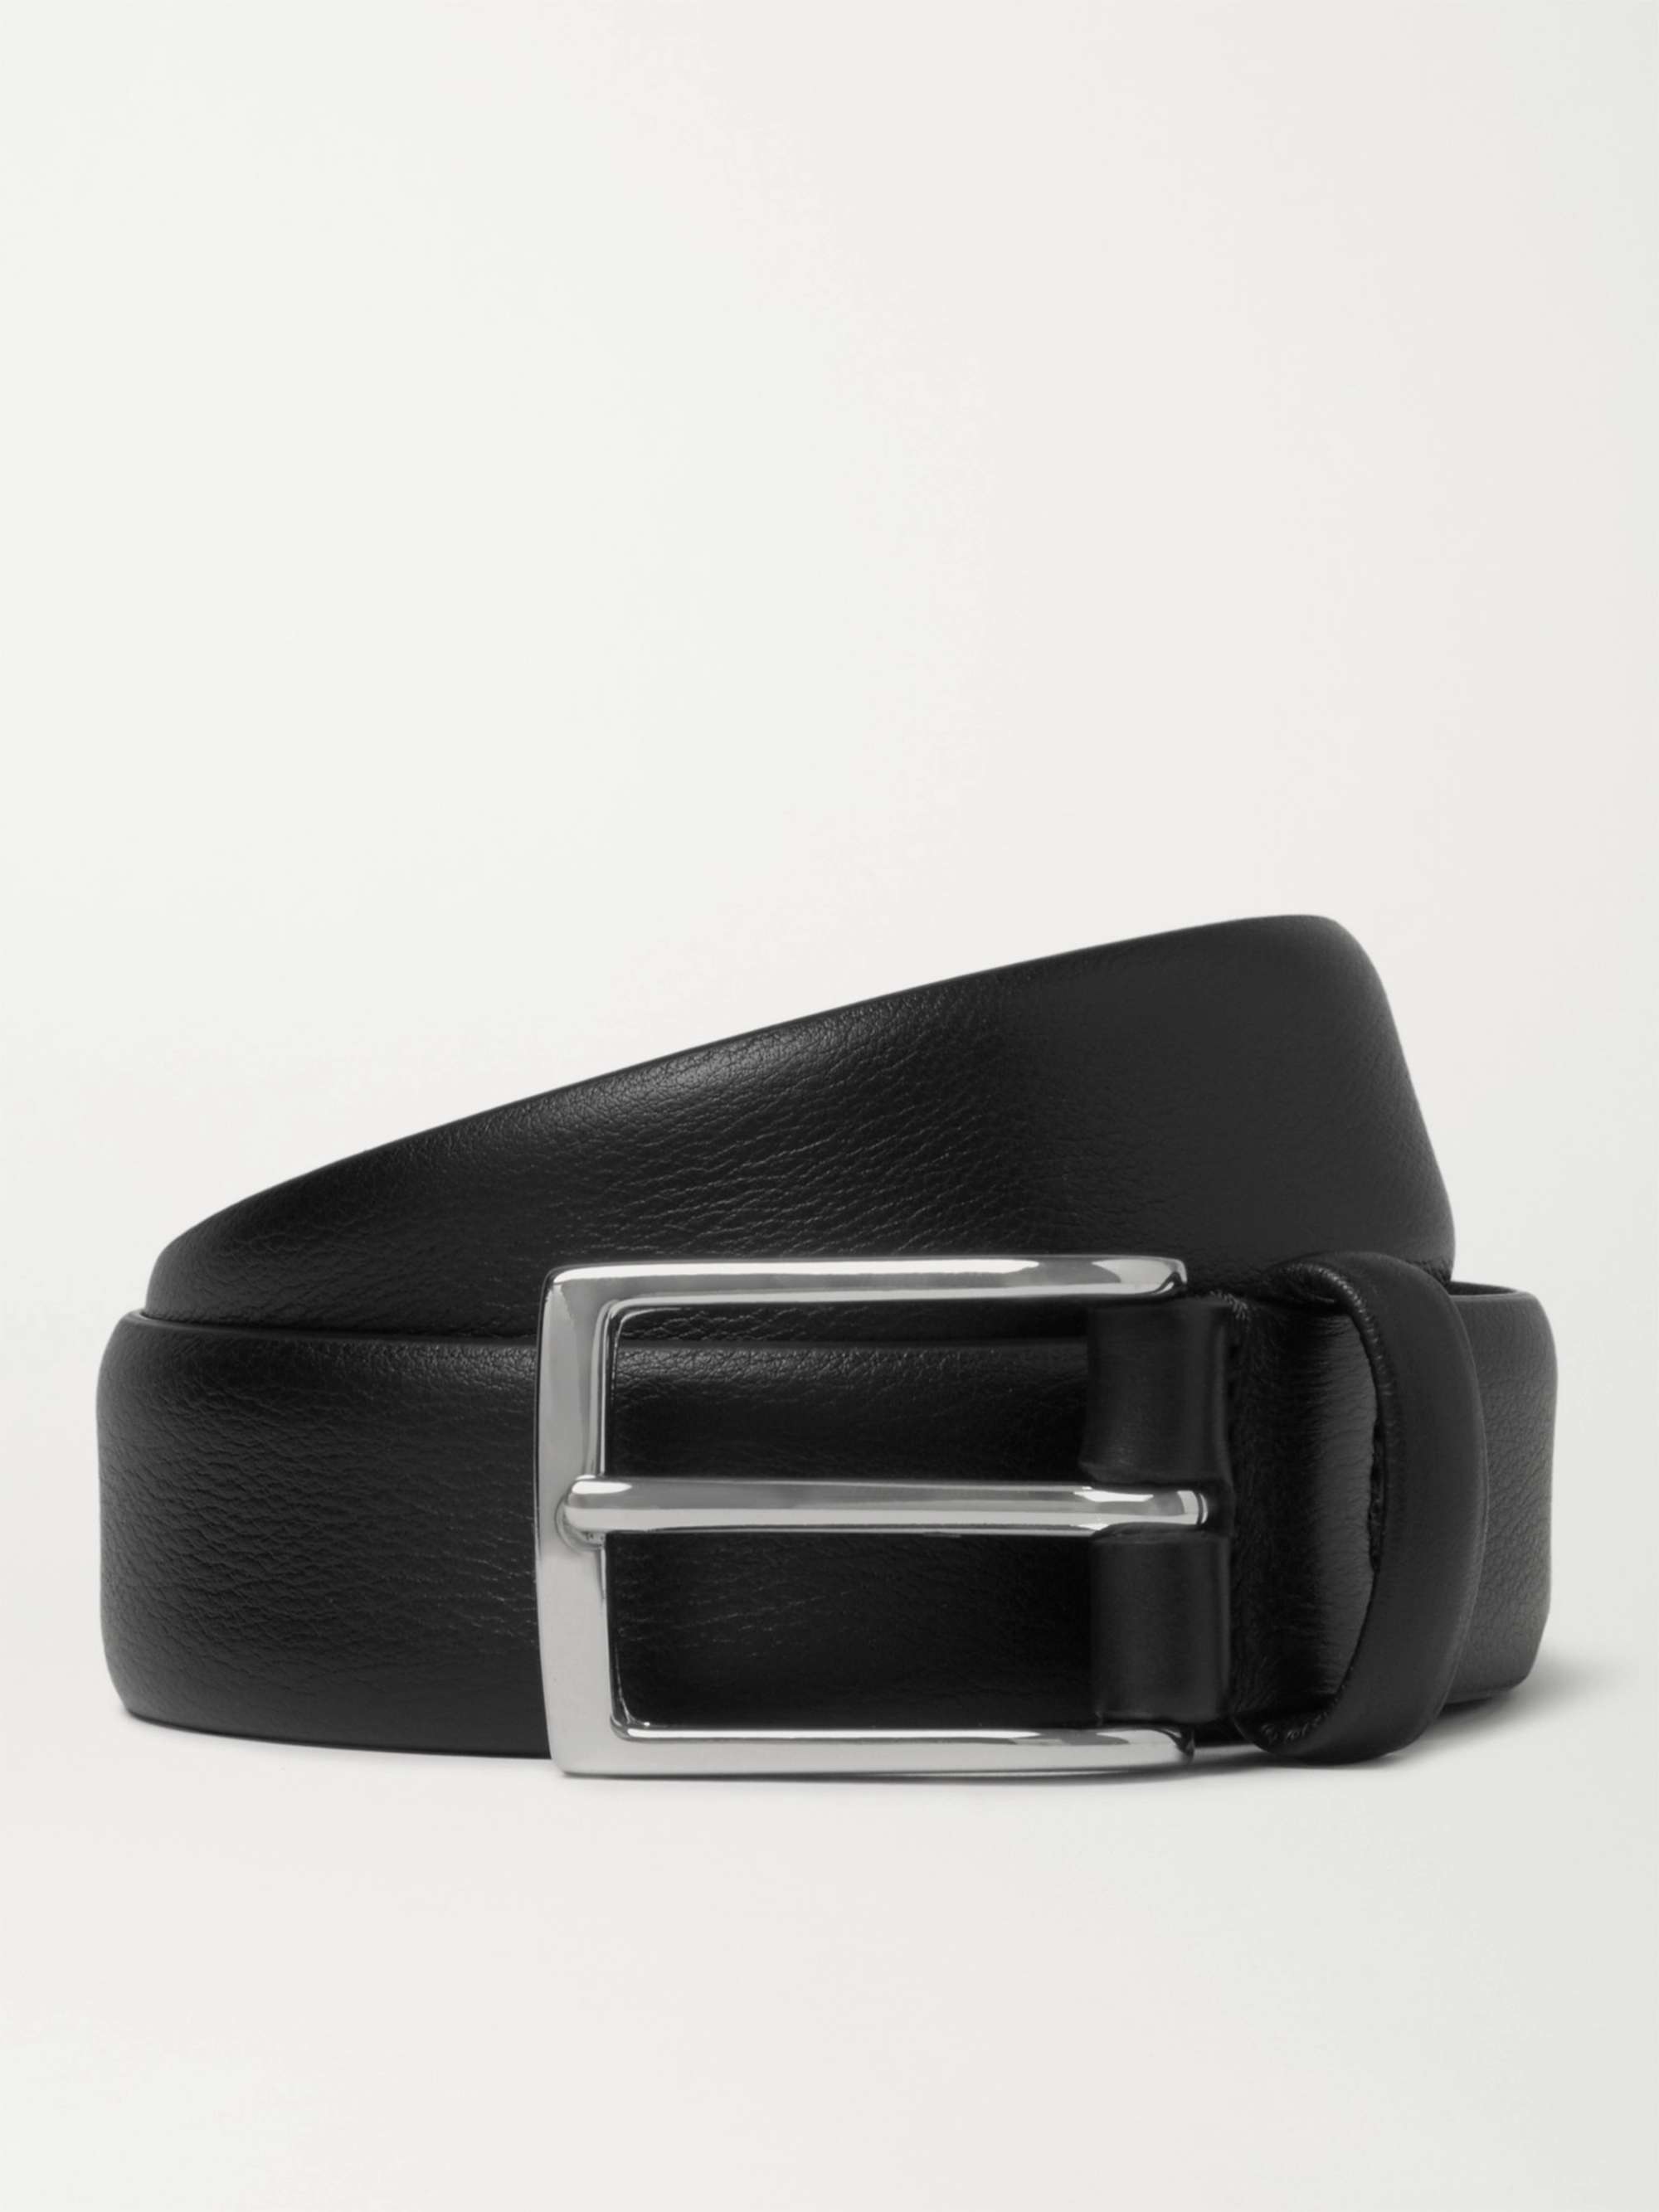 Anderson's pebbled-texture Leather Belt - Farfetch